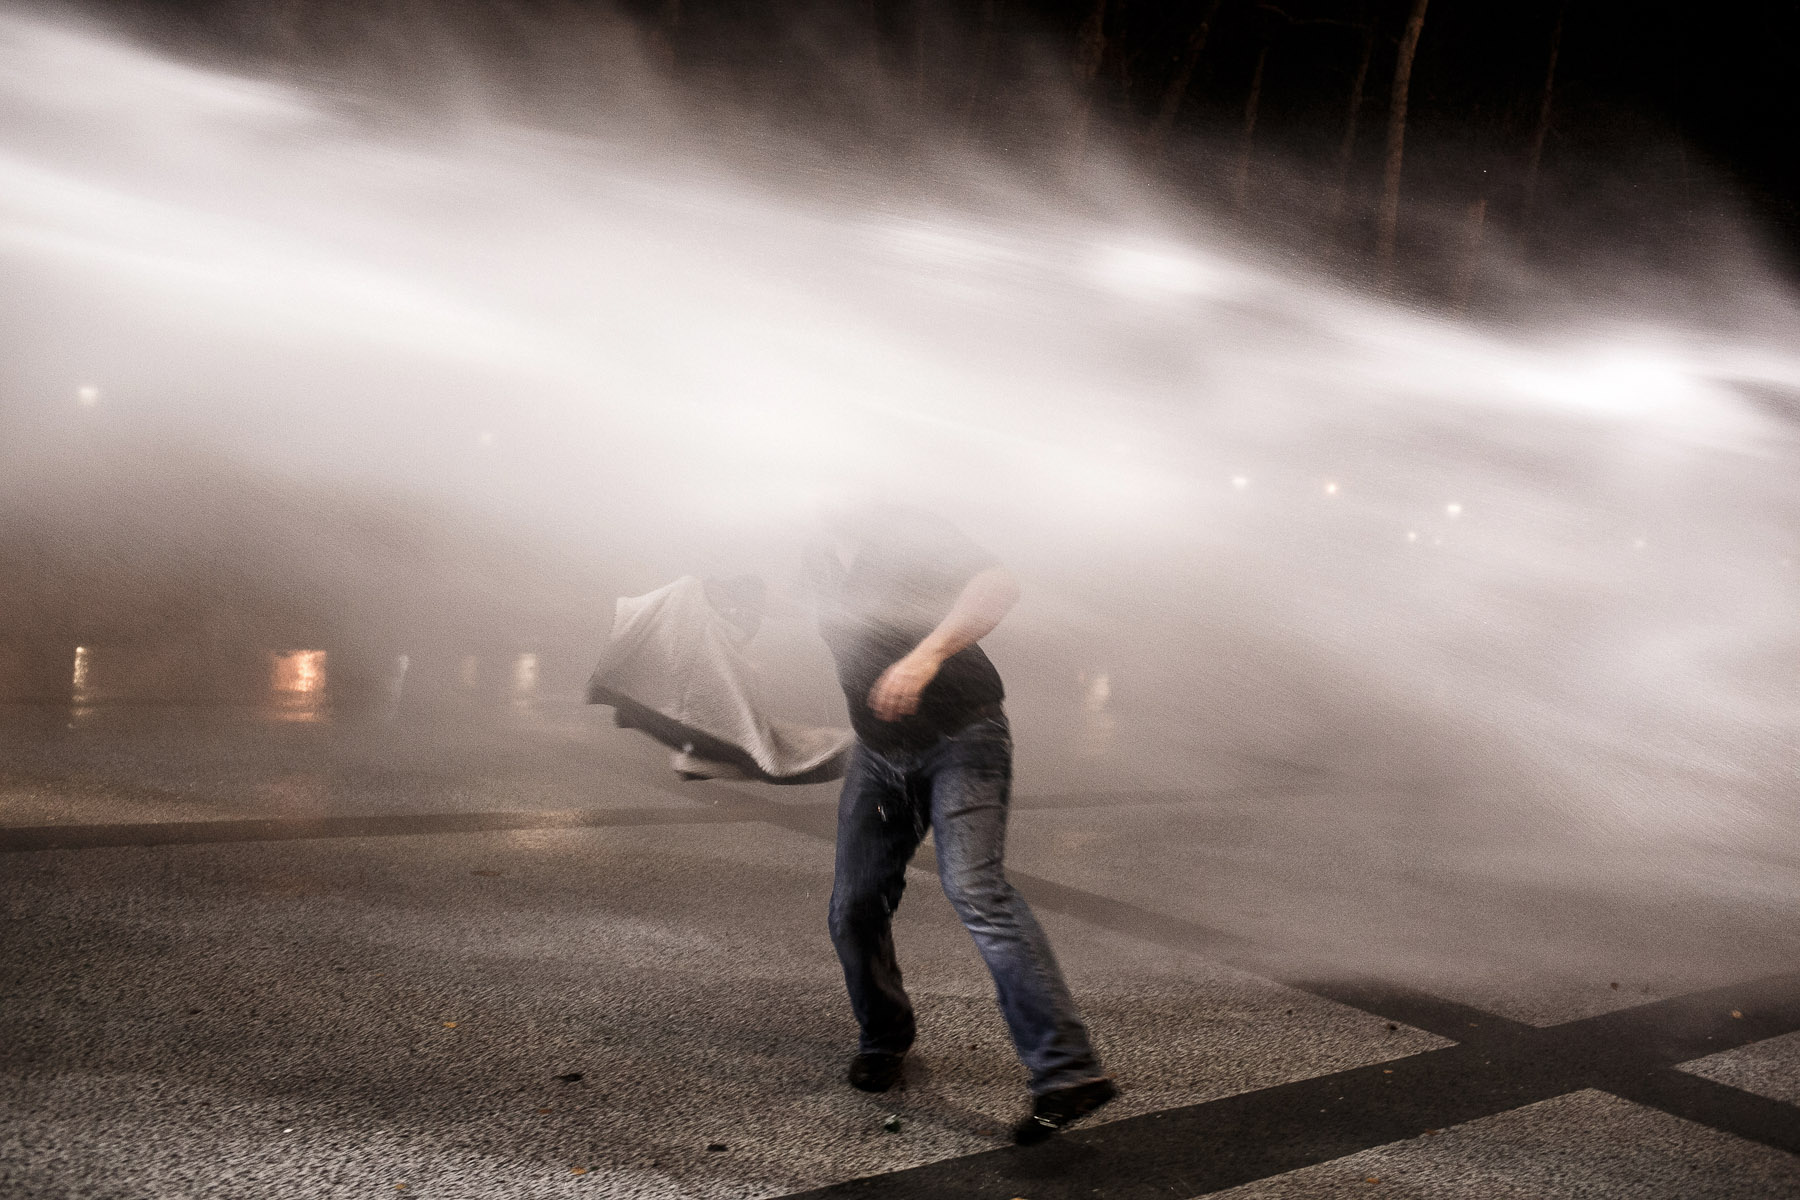 A protester tries to evade a water canon jet during anti-government protests in Ljubljana, Slovenia, on November 30, 2012. This was the first time in history of the country that the water canon was used.